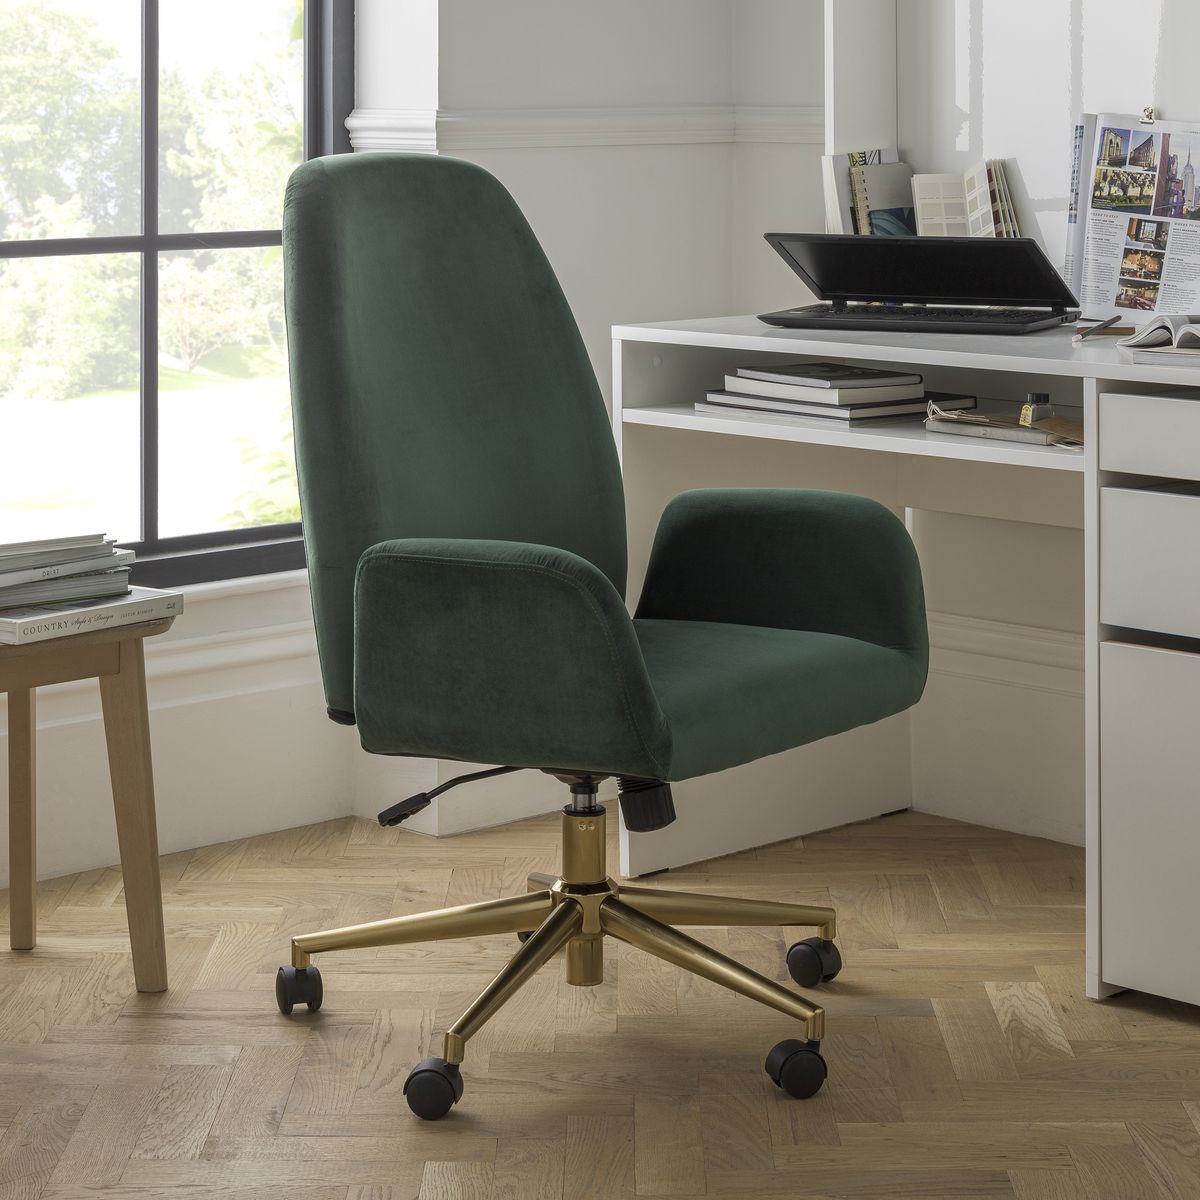 Best desk chairs 2021 stylish and comfy picks for your